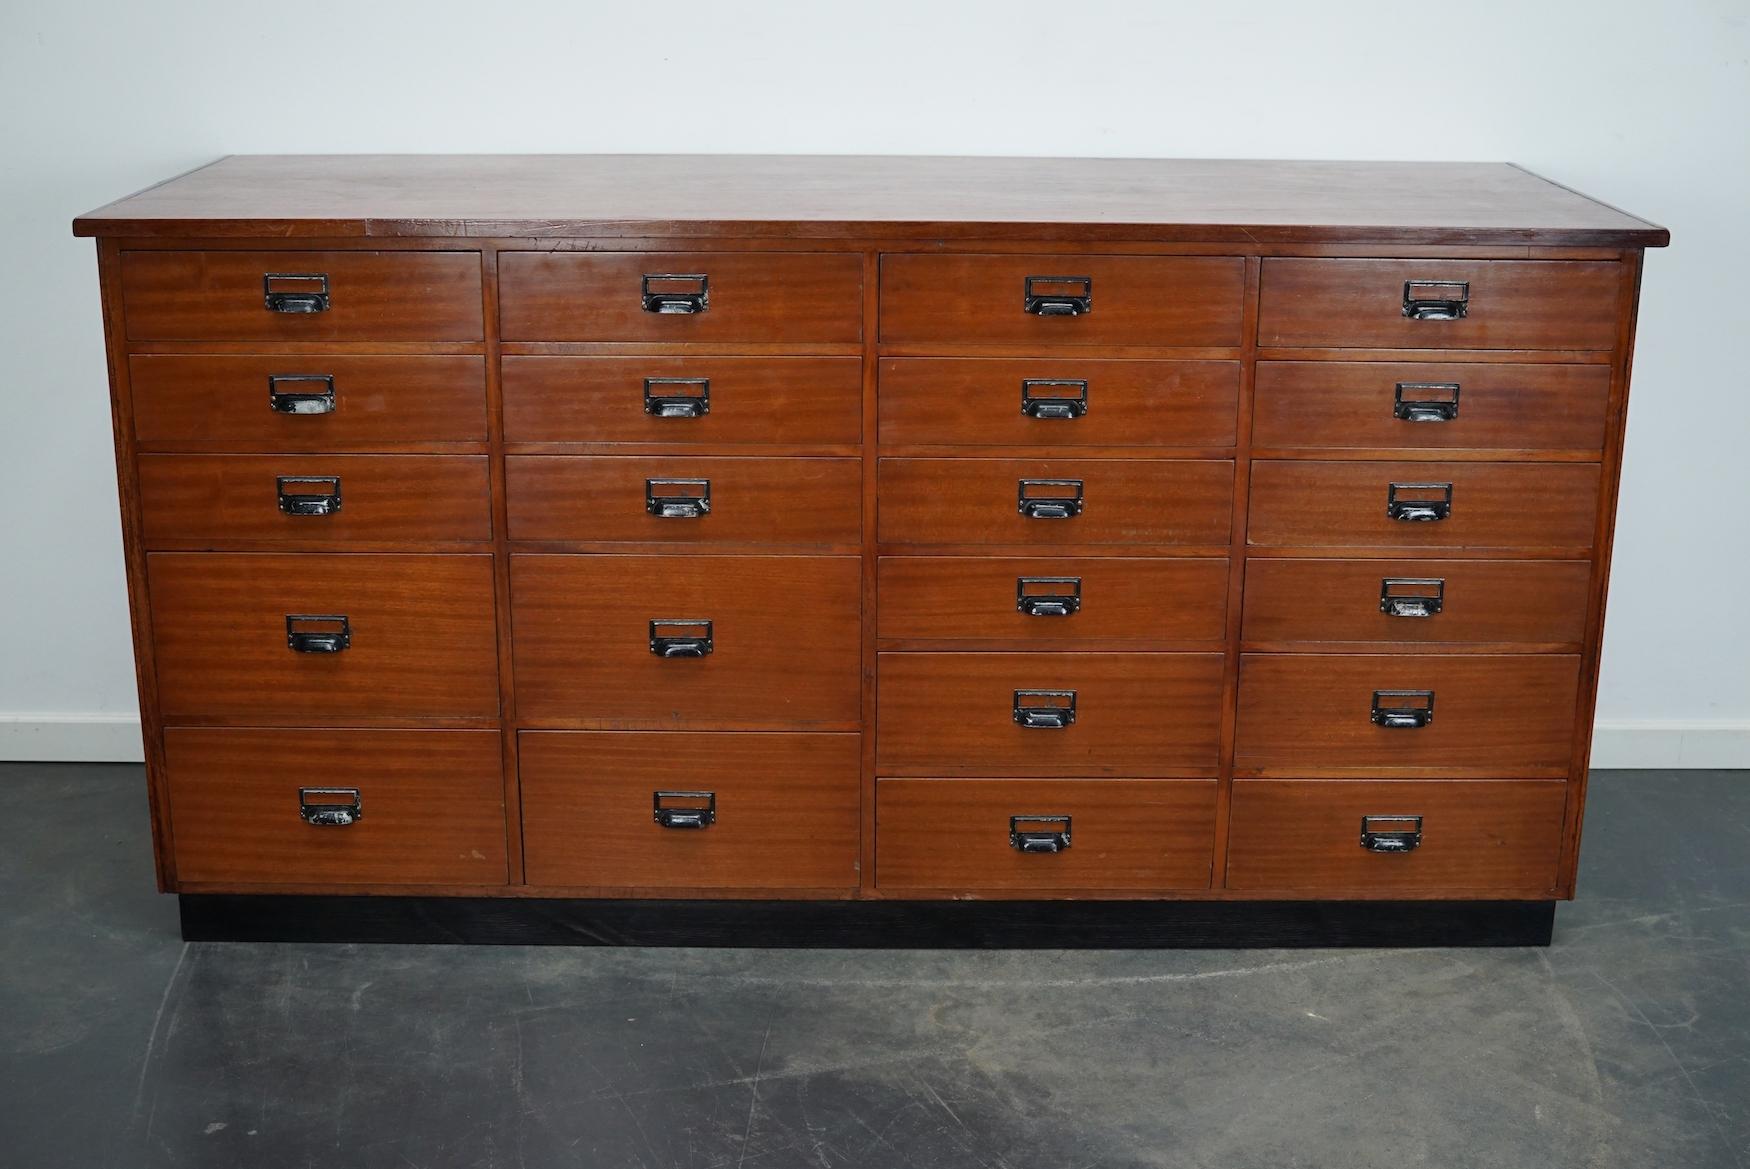 This apothecary cabinet was made circa 1950s in the Netherlands. The cabinet was used in a fabrics shop as a counter. It features 22 drawers with black metal handles. The interior dimensions of the drawers are: D W H 53 x 38 x 8 / 12 / 18 cm.